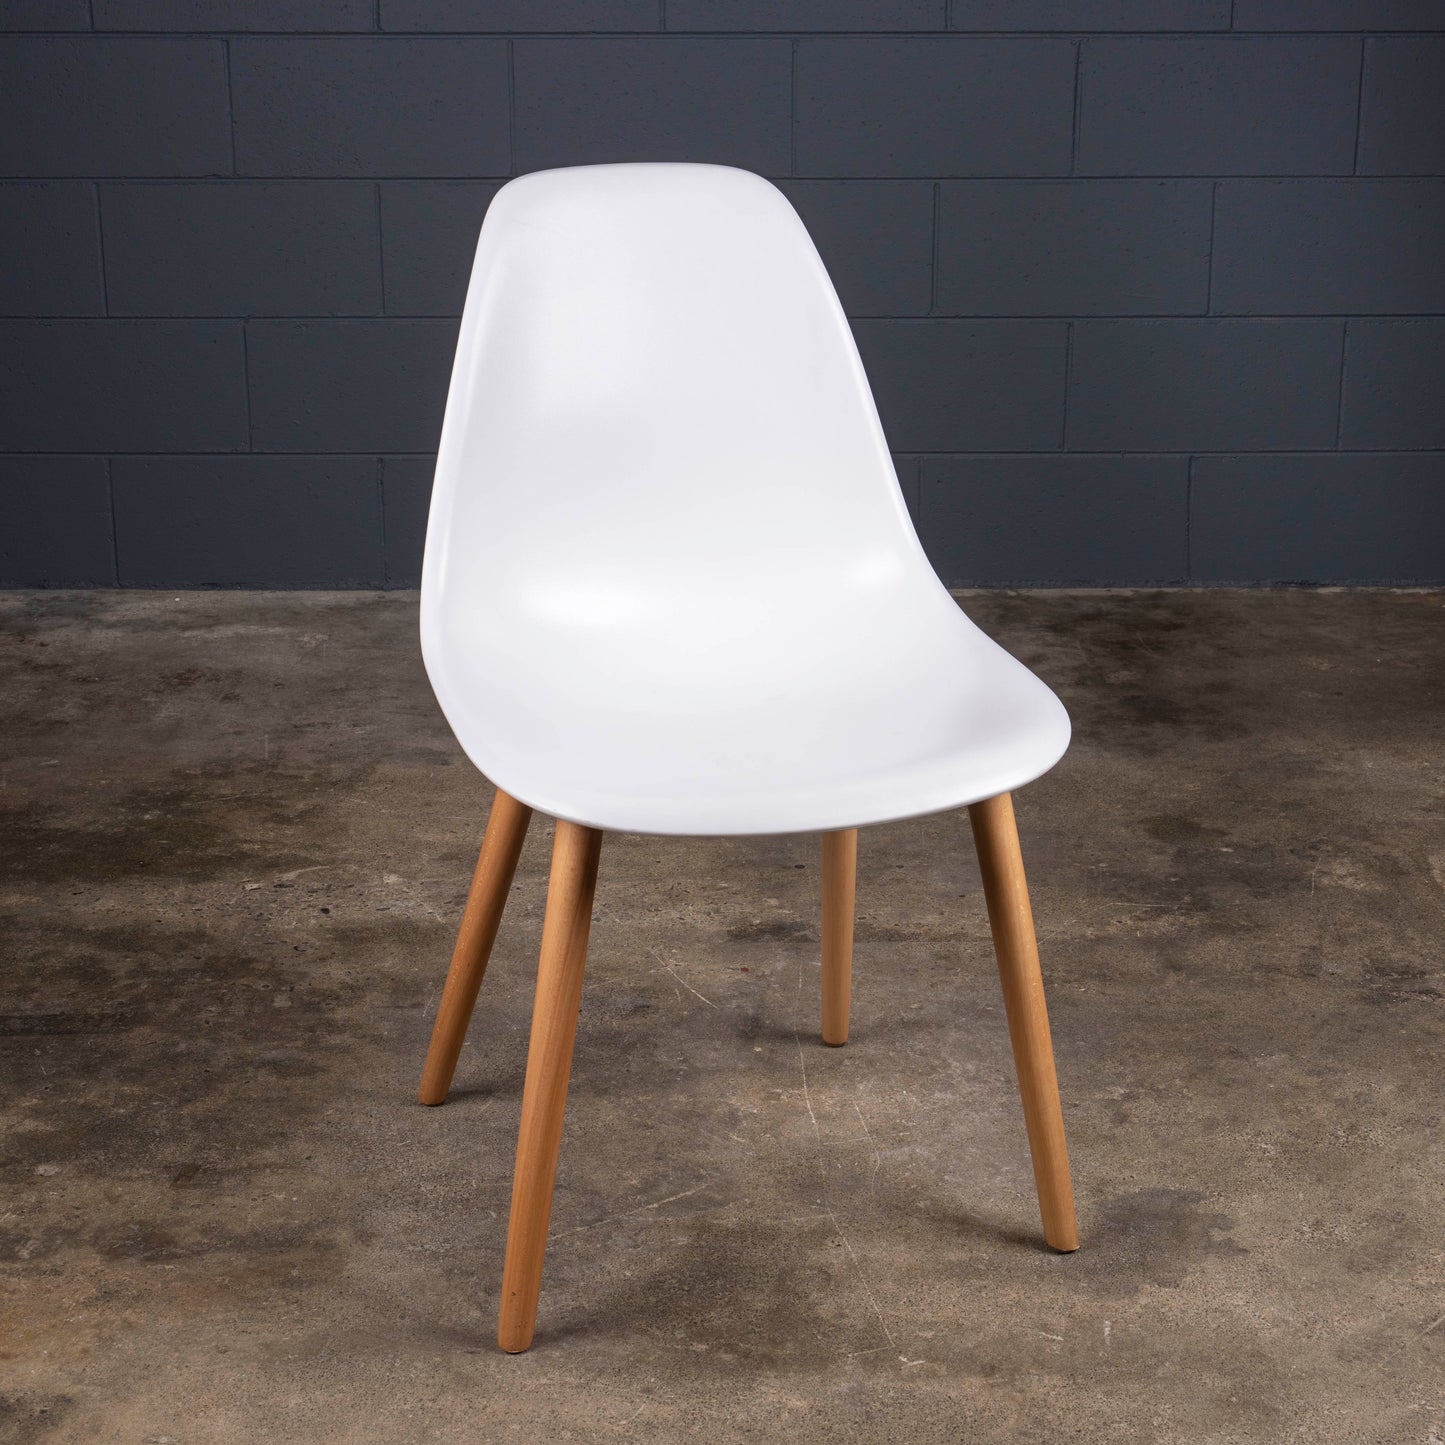 Max Dining Chair